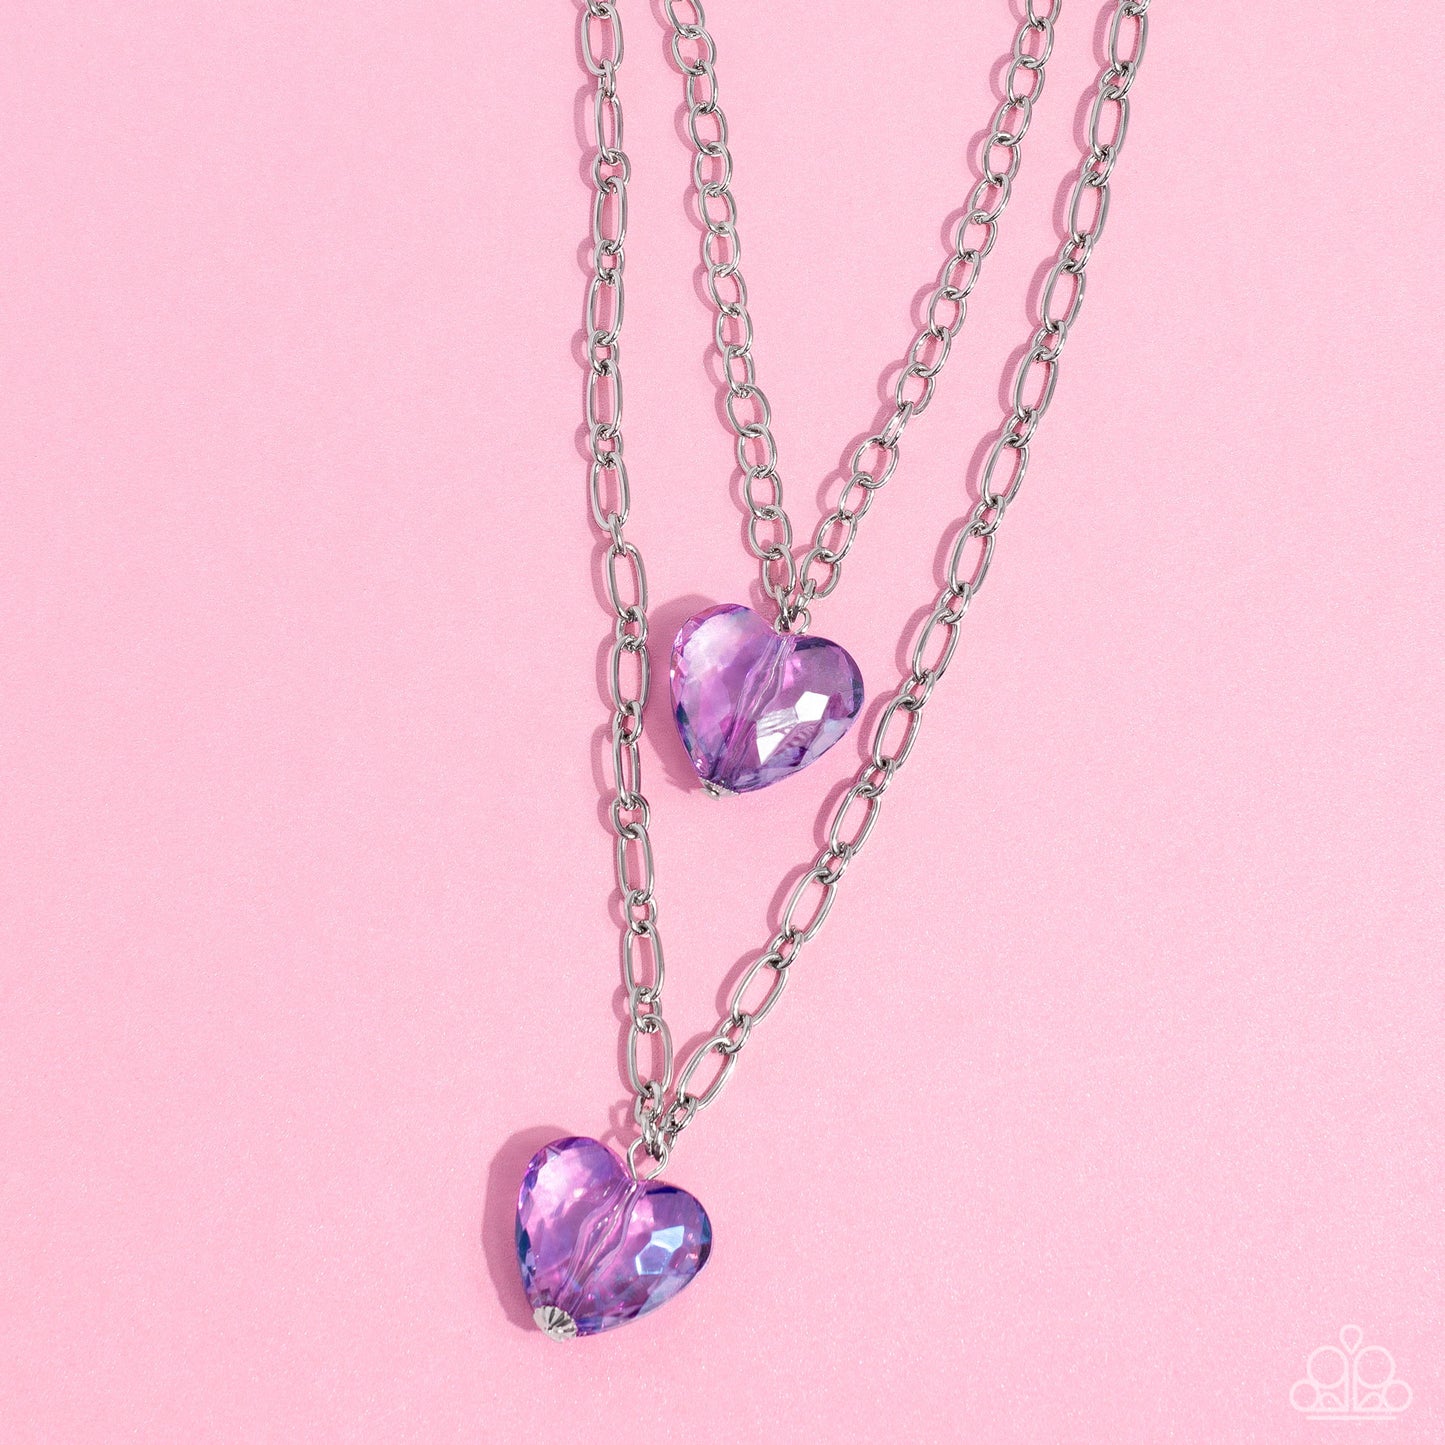 Paparazzi Accessories - Layered Love - Purple Heart Necklaces featuring a subtle iridescent shimmer, two glassy purple gem hearts are delicately suspended above one another on a paperclip and silver oval link chain for a whimsical double-stacked display. Features an adjustable clasp closure.  Sold as one individual necklace. Includes one pair of matching earrings.